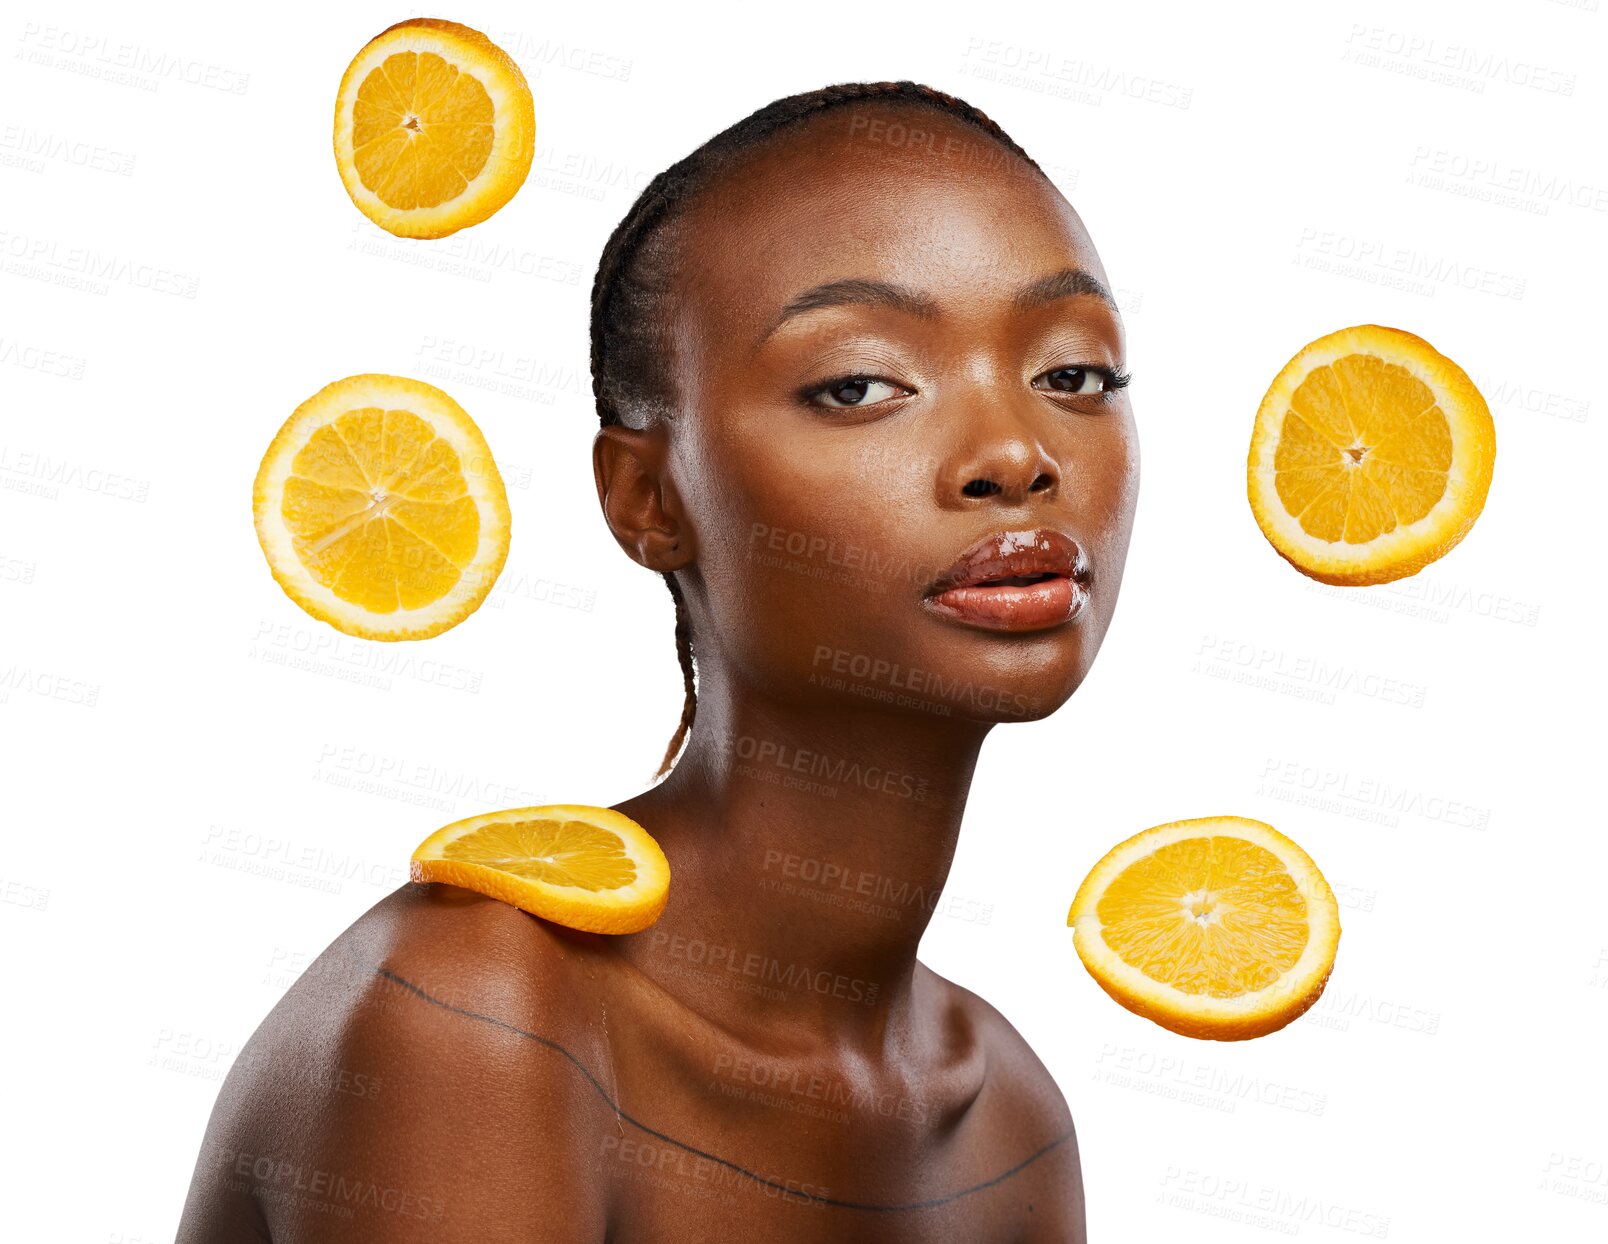 Buy stock photo Black woman, portrait and orange in vitamin c, skincare or spa treatment isolated on a transparent PNG background. Face of African female person with organic citrus fruit for detox, diet or nutrition